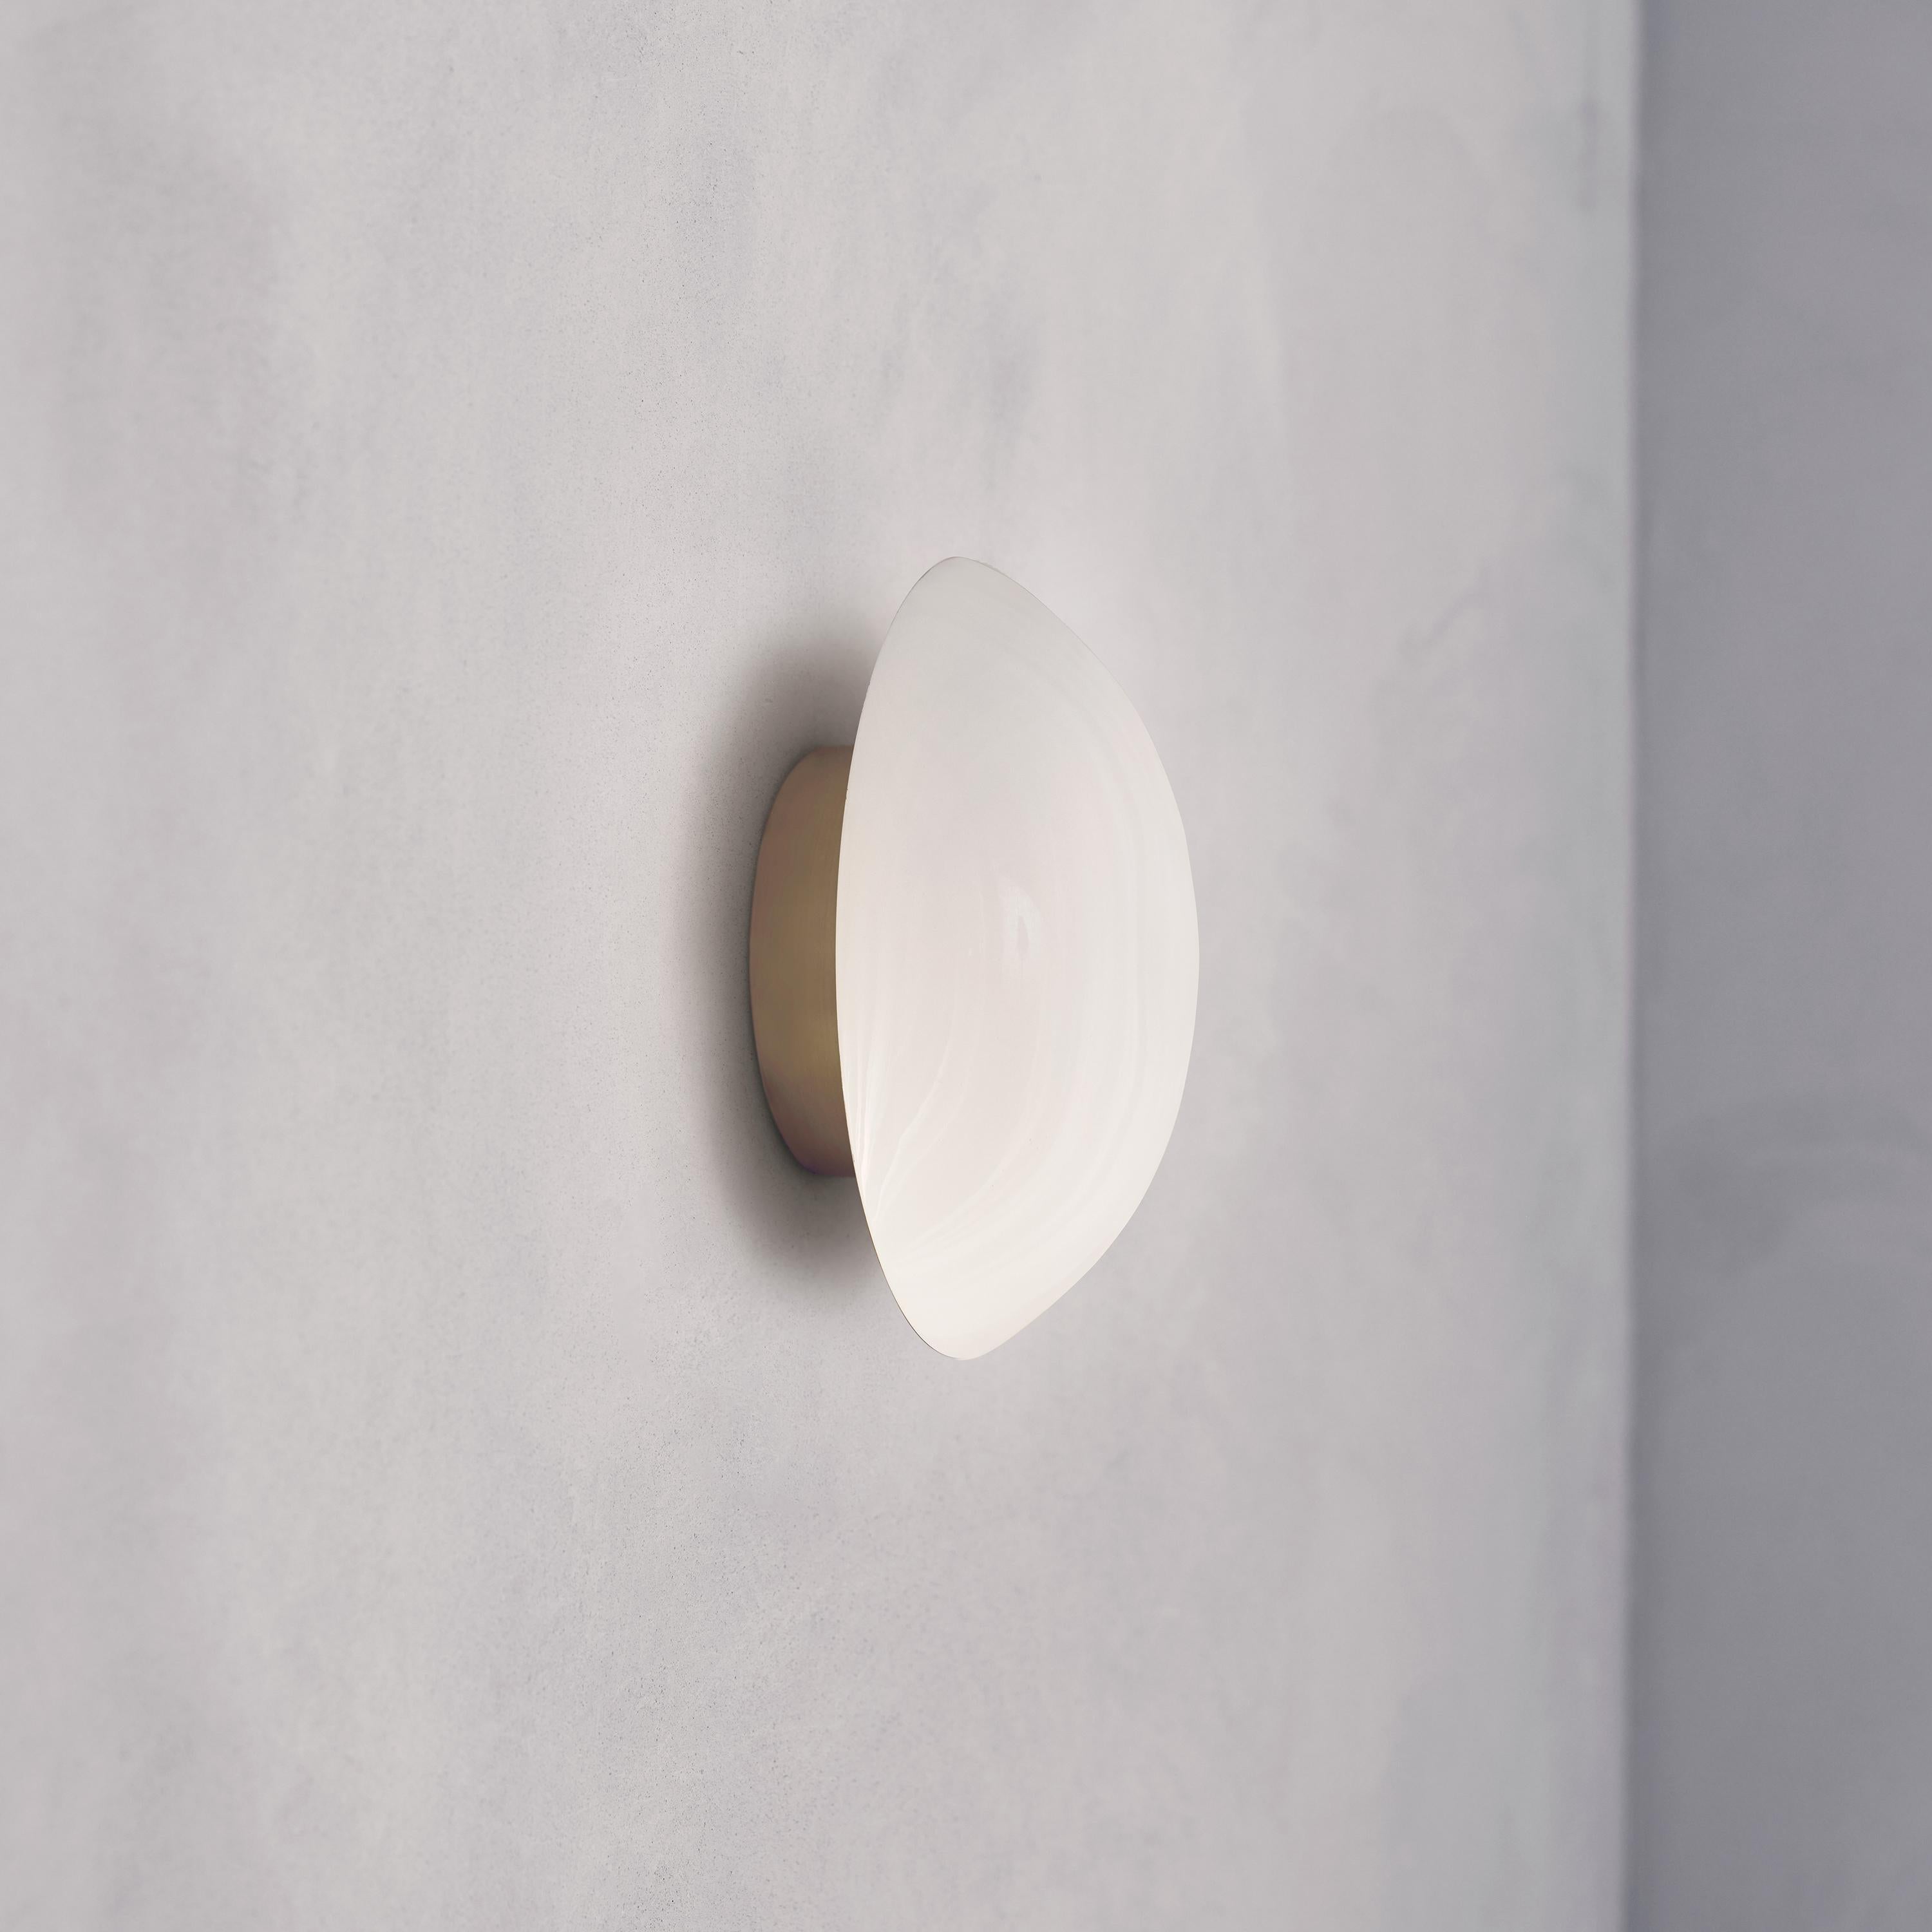 Contemporary Cosmic 'Comet Purion 26' Handmade White Lacquered Brass Wall Light, Sconce For Sale